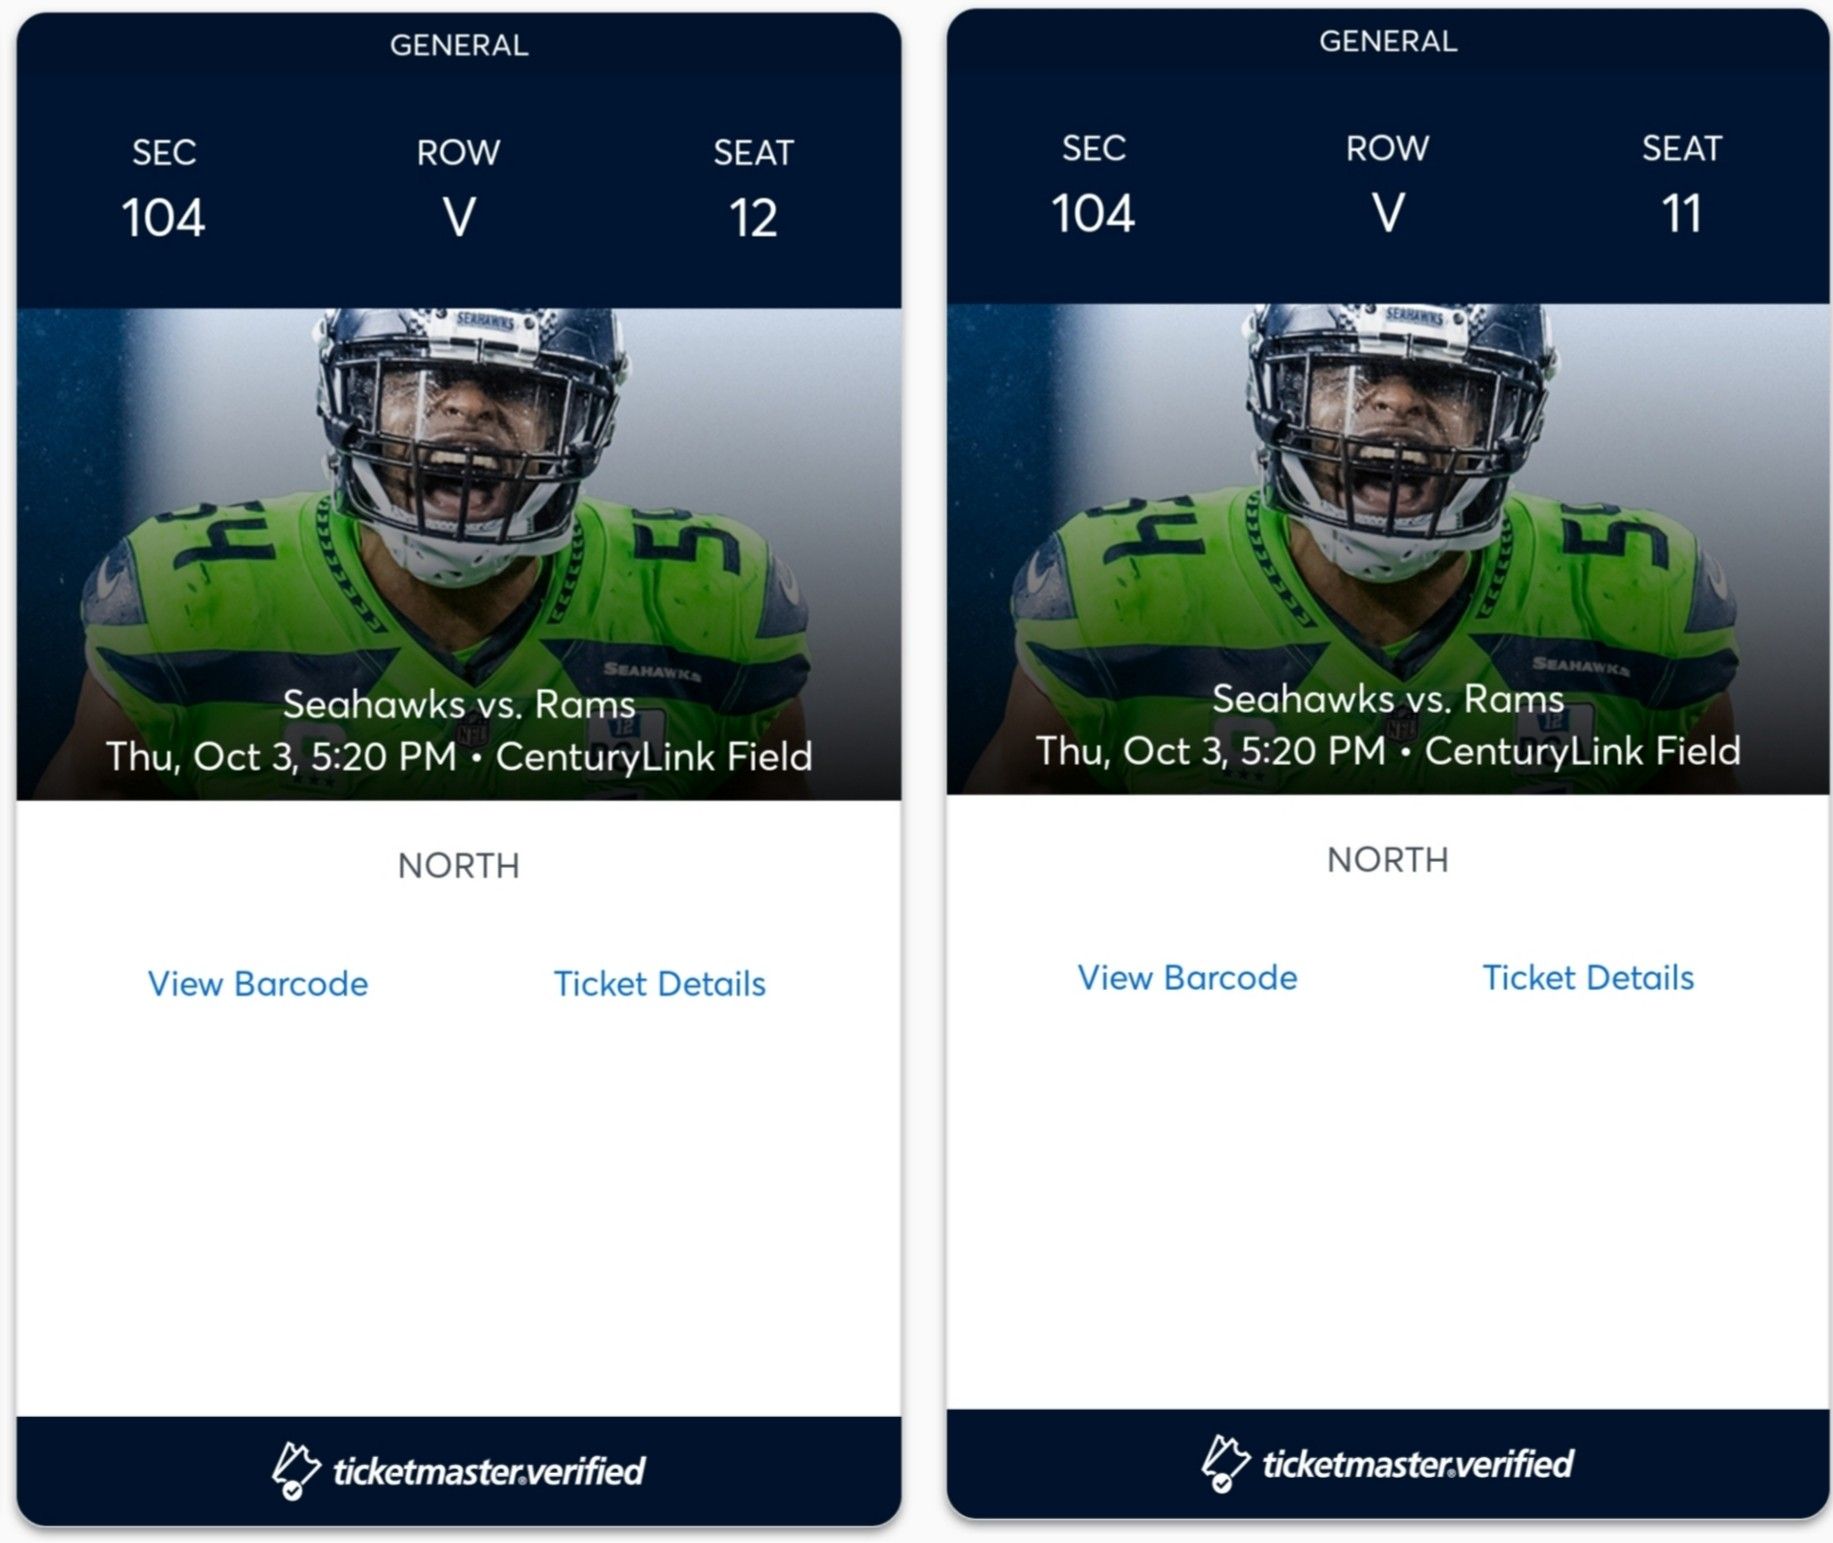 Two Seahawks vs Rams tickets $400 for both